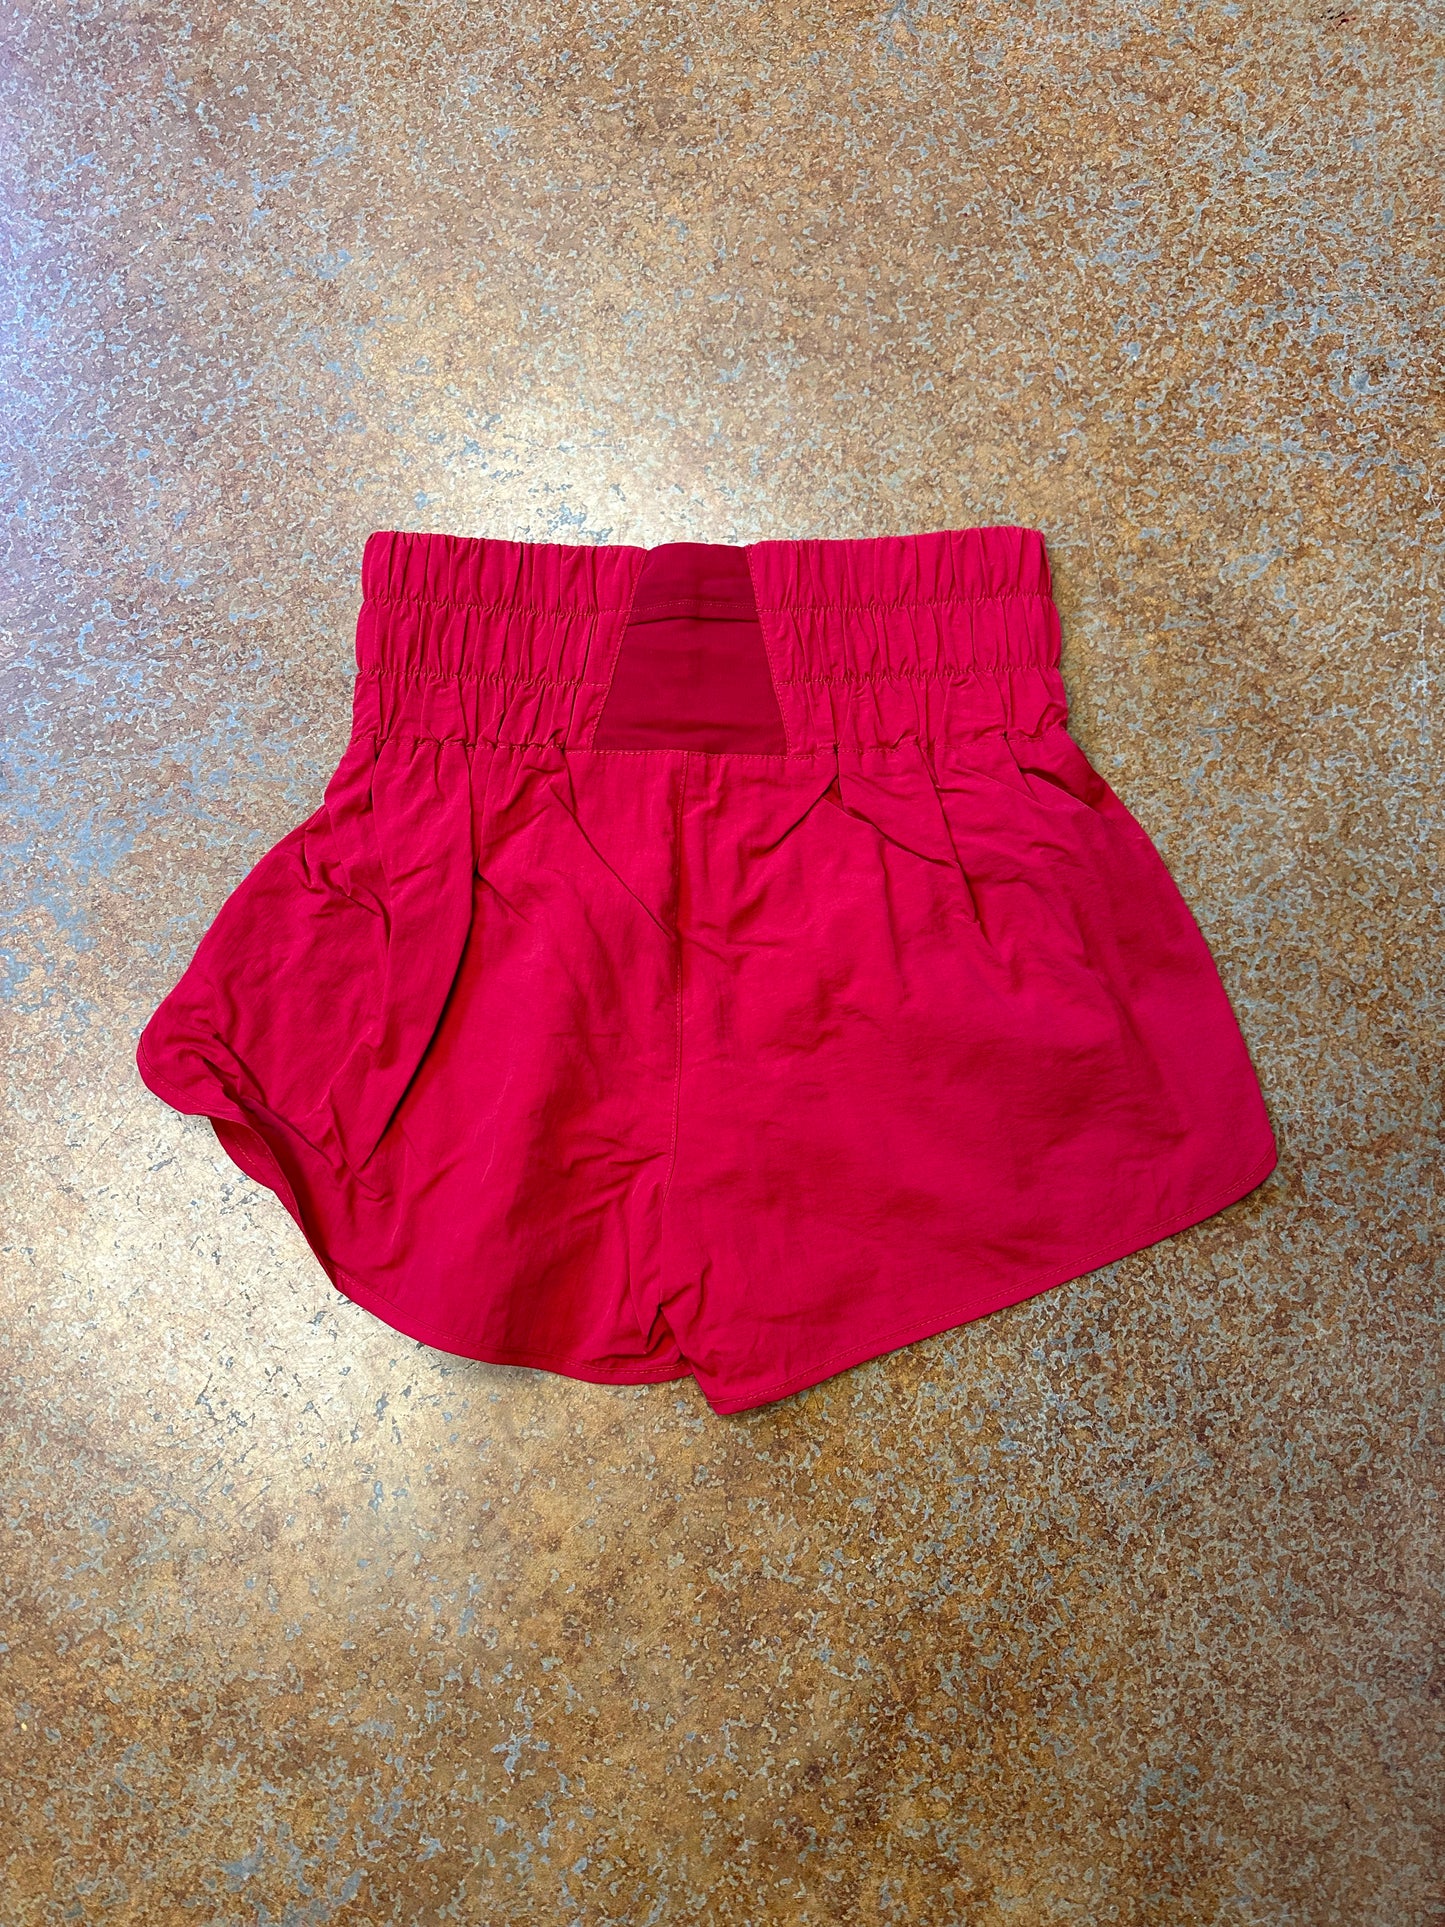 Ruby Buckle Athletic Shorts